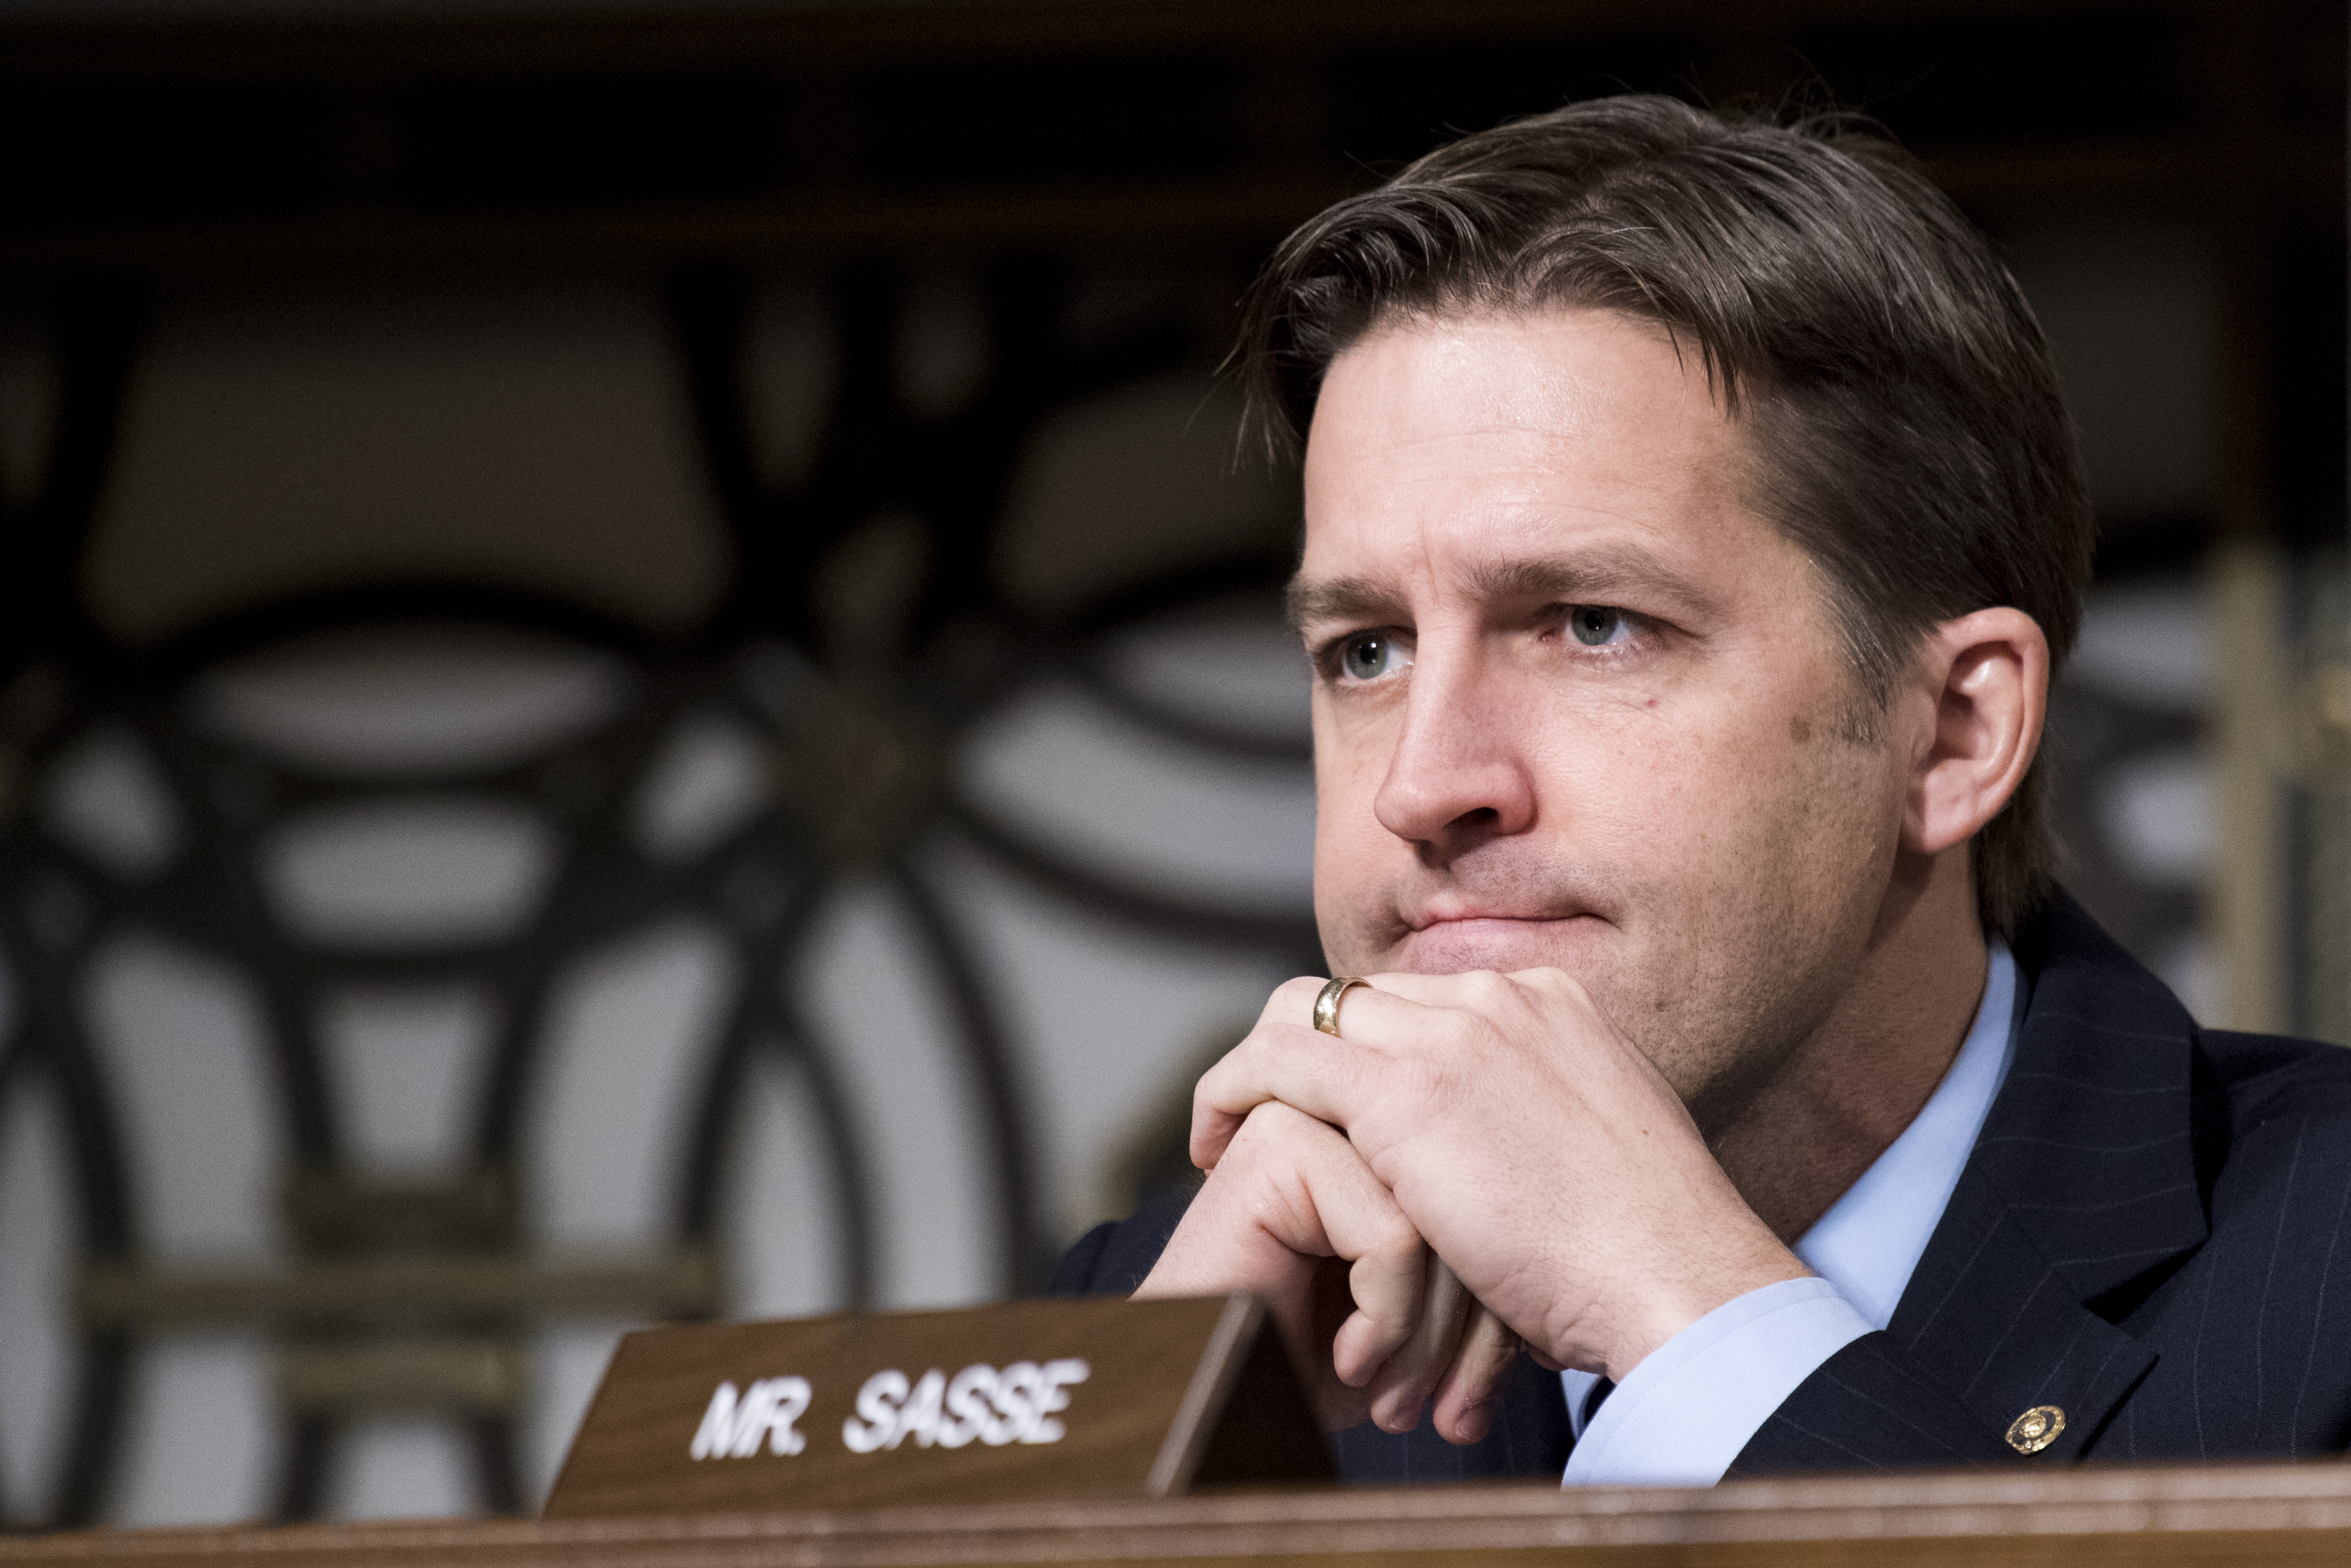 Sen. Ben Sasse, R-Neb., listens as Secretary of Defense nominee James Mattis testifies during his confirmation hearing in the Senate Armed Services Committee on Thursday, Jan. 12, 2017. (Bill Clark&mdash;CQ-Roll Call,Inc./Getty Images)